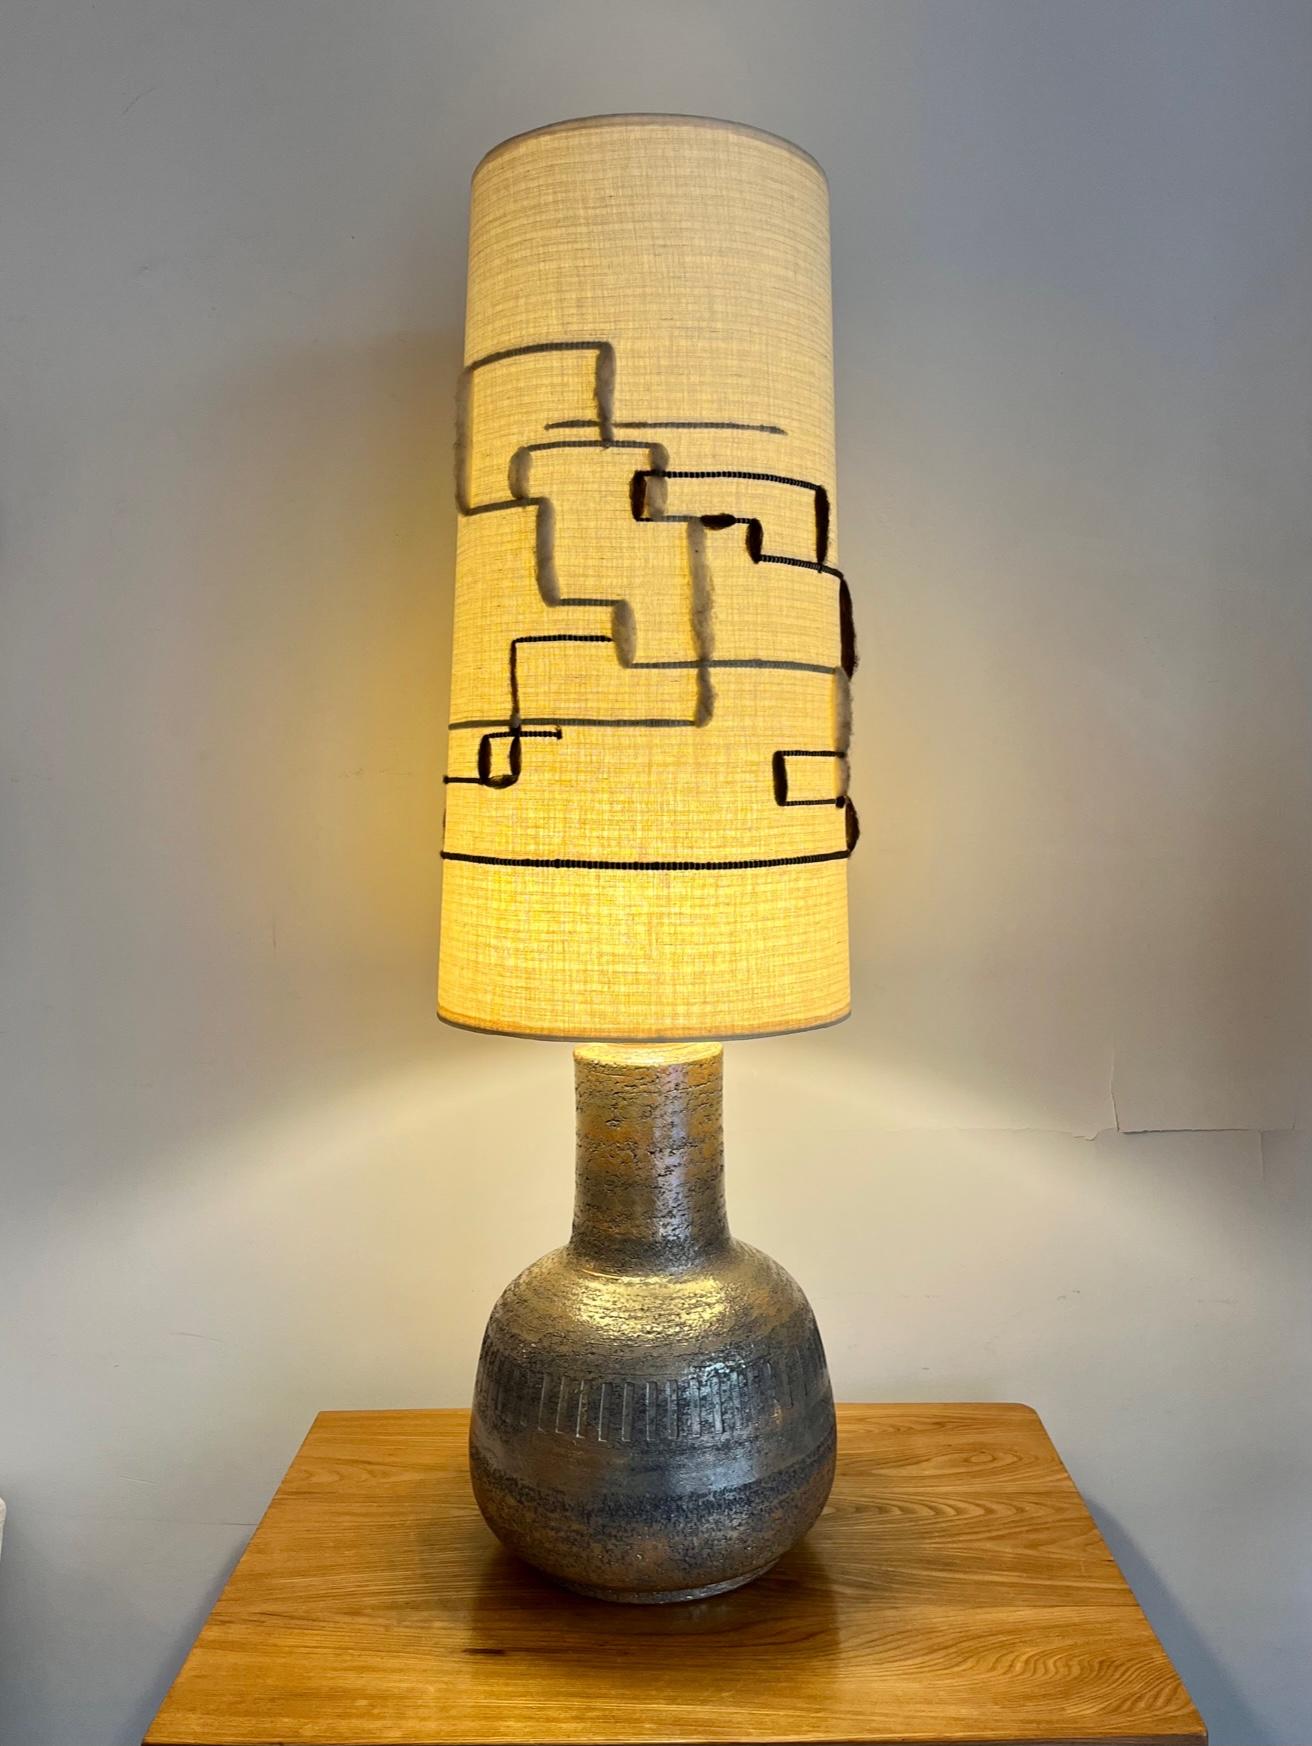 Large and high table lamp,

glazed ceramic sporting scarified  motives
Shiny metallic luster.
Original linen shade with wool linear decoration.

Can also be used as floor lamp.

By Marius Bessone ( 1929/2001 )
Vallauris, South of France circa